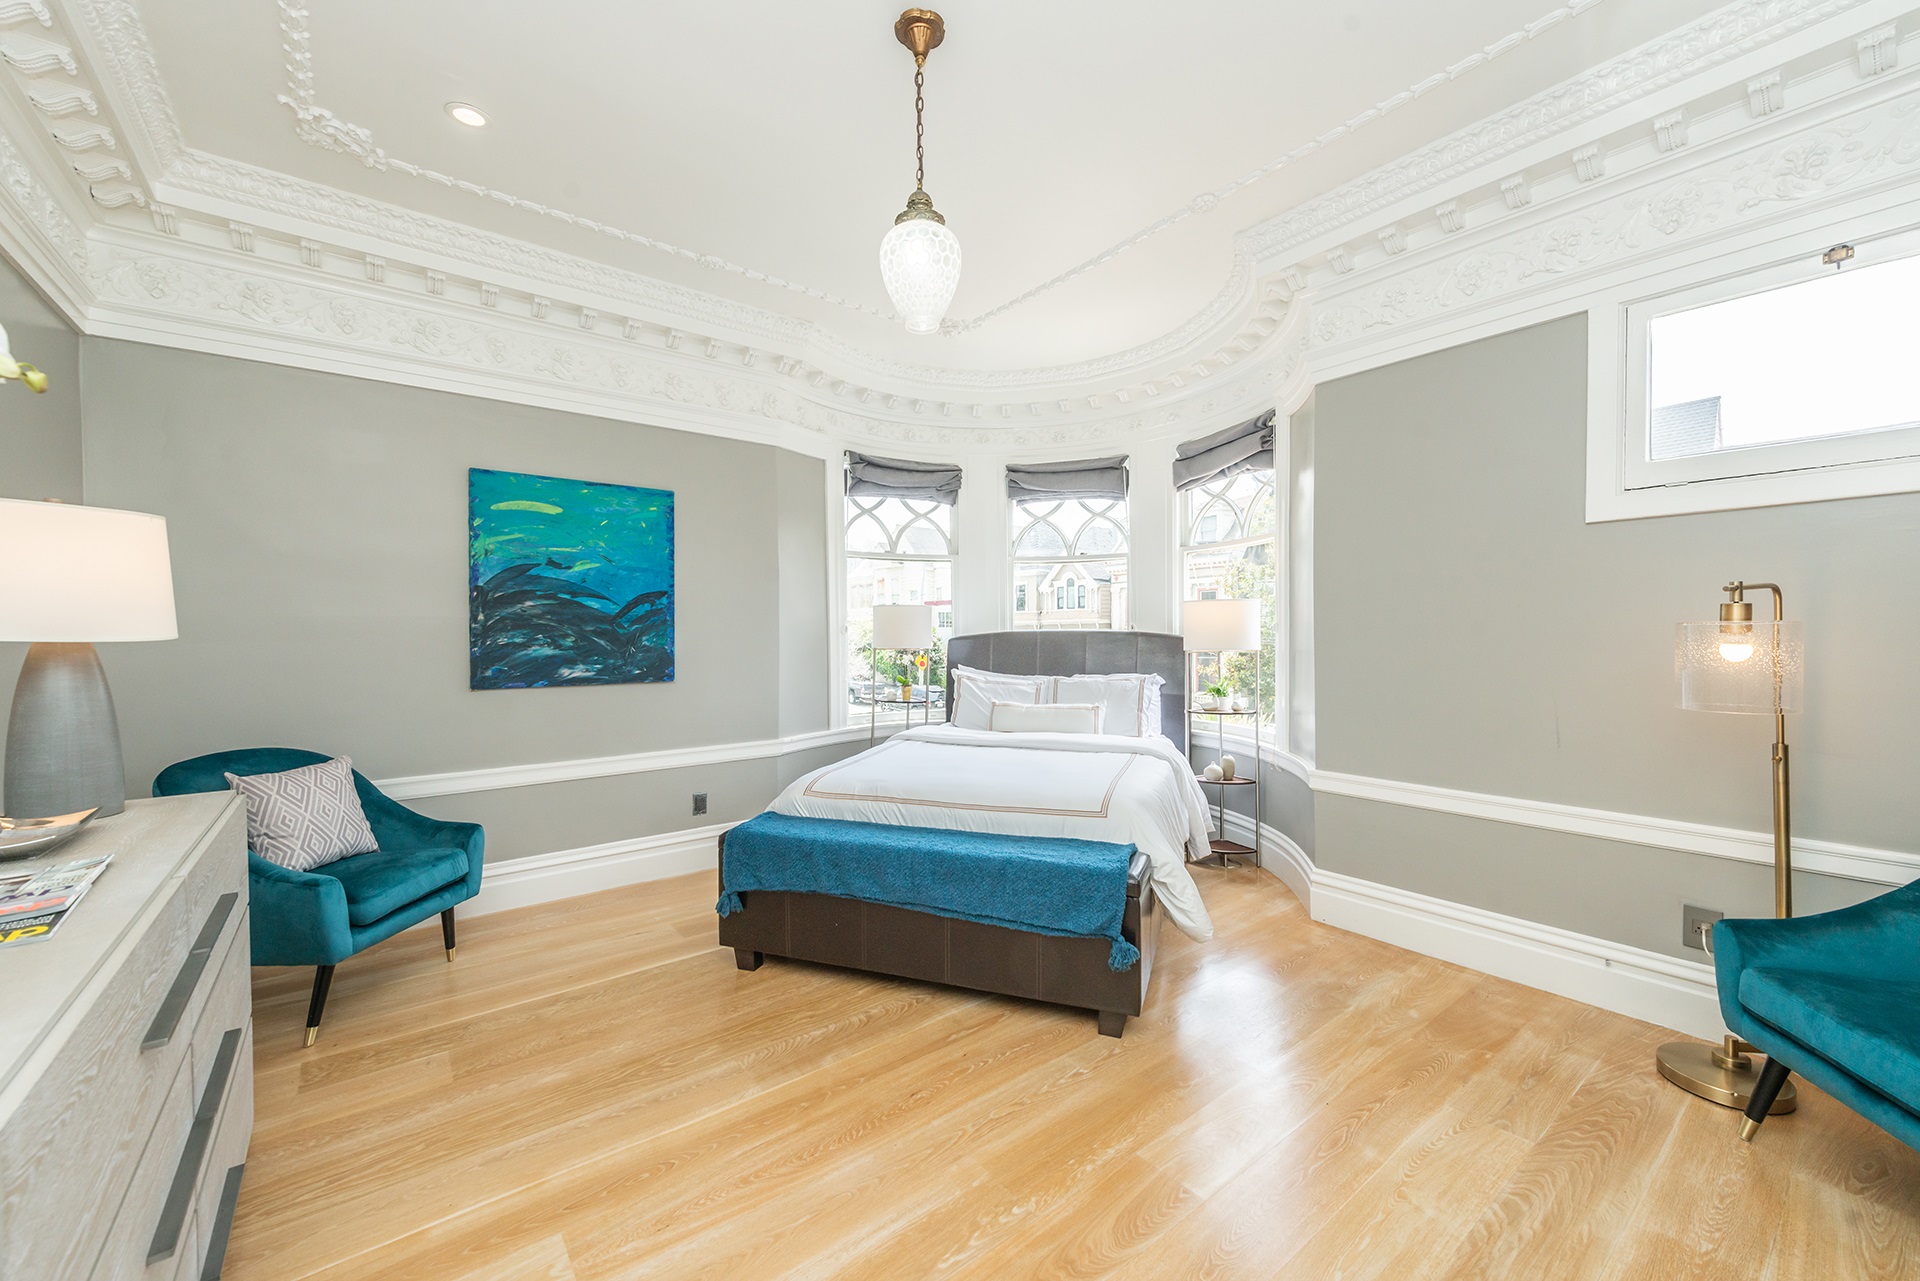 Property Photo: Primary bedroom that has bed centered under bay windows. There is stunning crown molding detail on the ceiling in this room. 